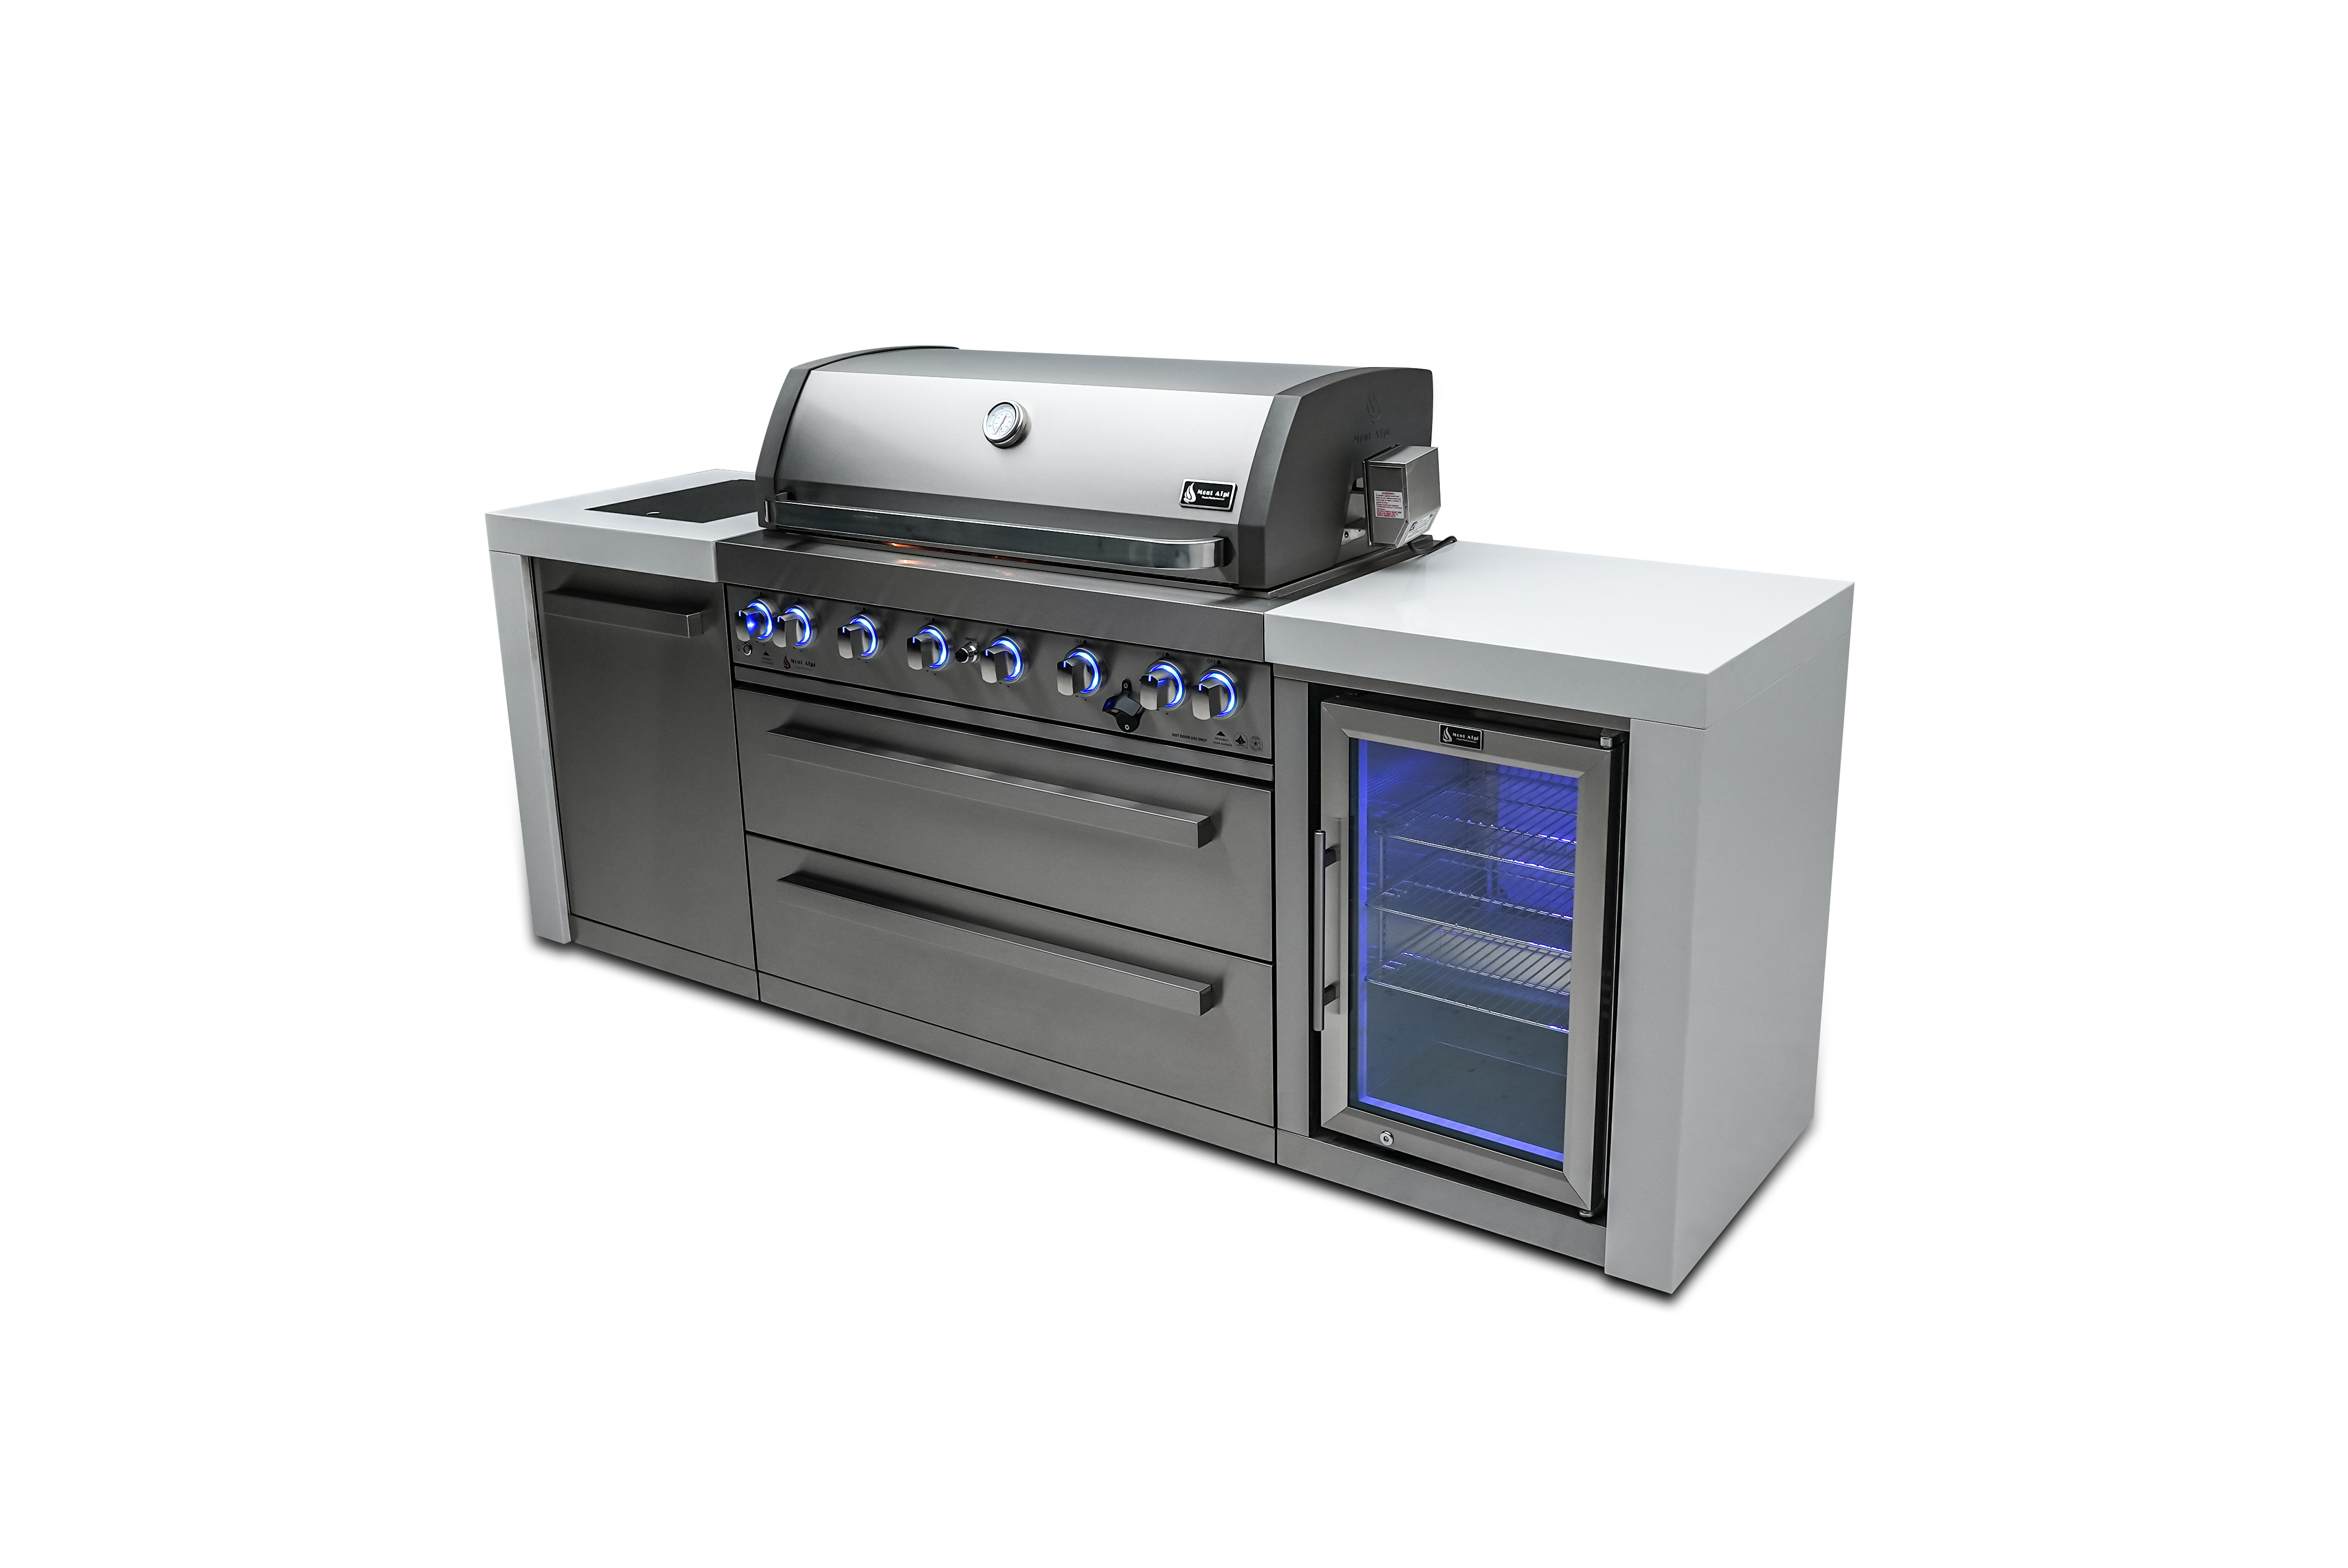 Mont Alpi 805 Grill Deluxe Island with Fridge cabinet - image 2 of 3